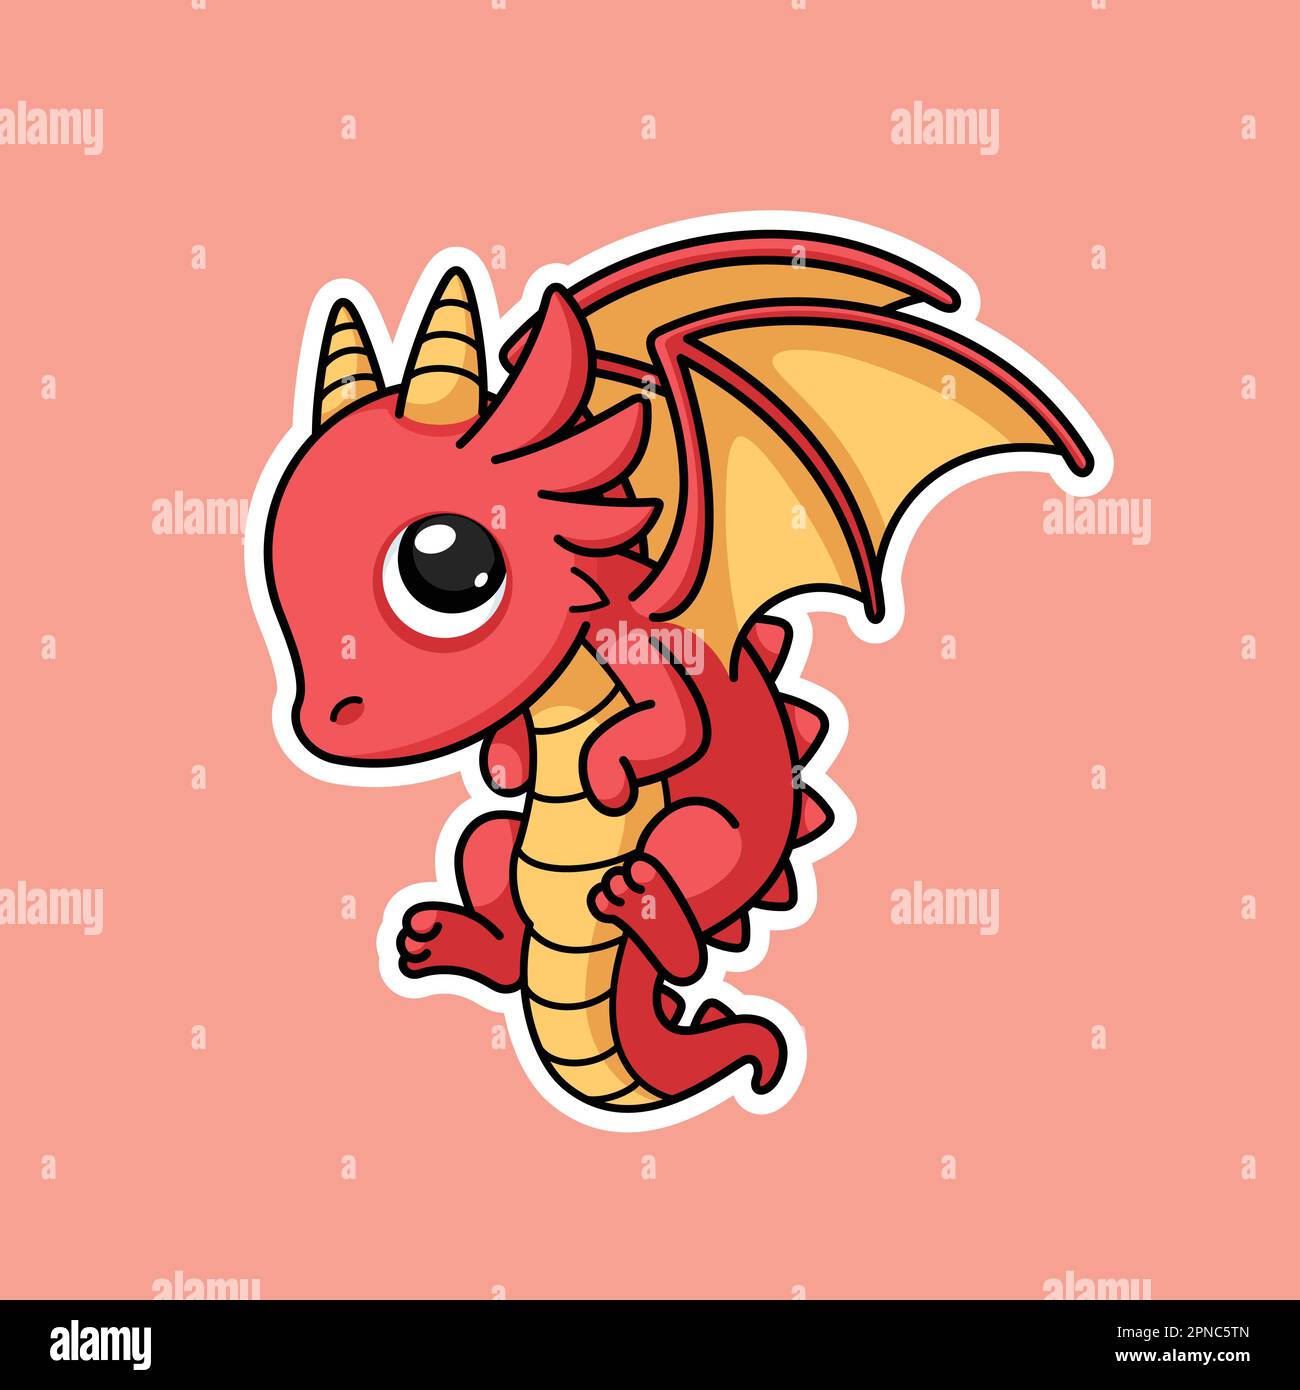 Cute Little Dragon Cartoon Character Premium Vector Graphics In Stickers Style Stock Vector